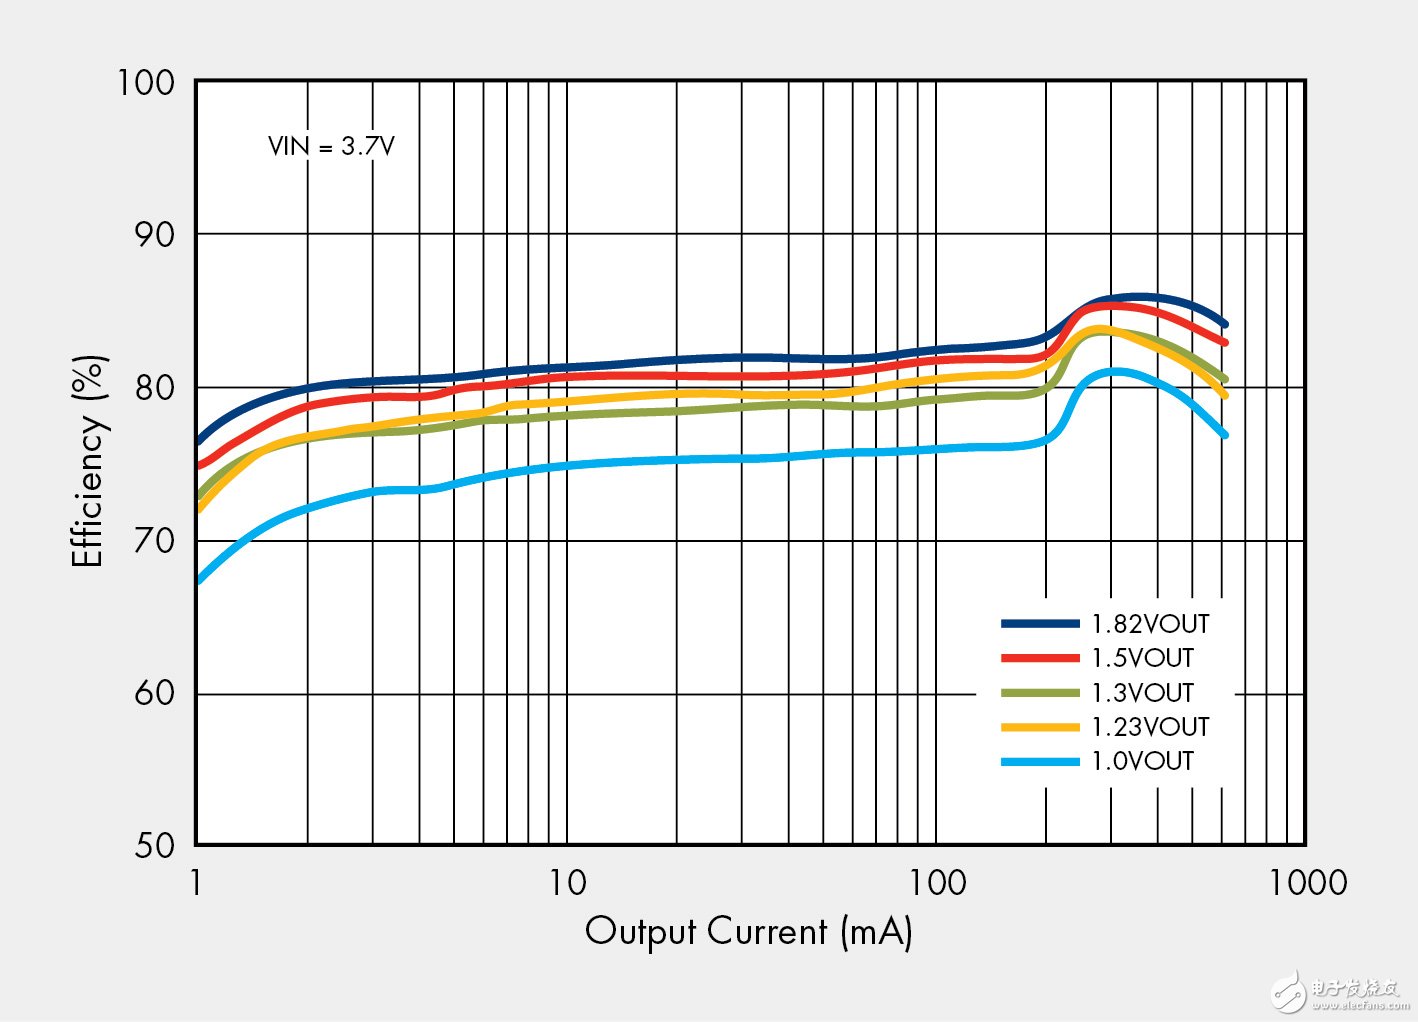 Figure 2. Efficiency curve of the FAN4603 DC/DC converter with a 3.7V input and a different output voltage with a 1mA to 600mA load.